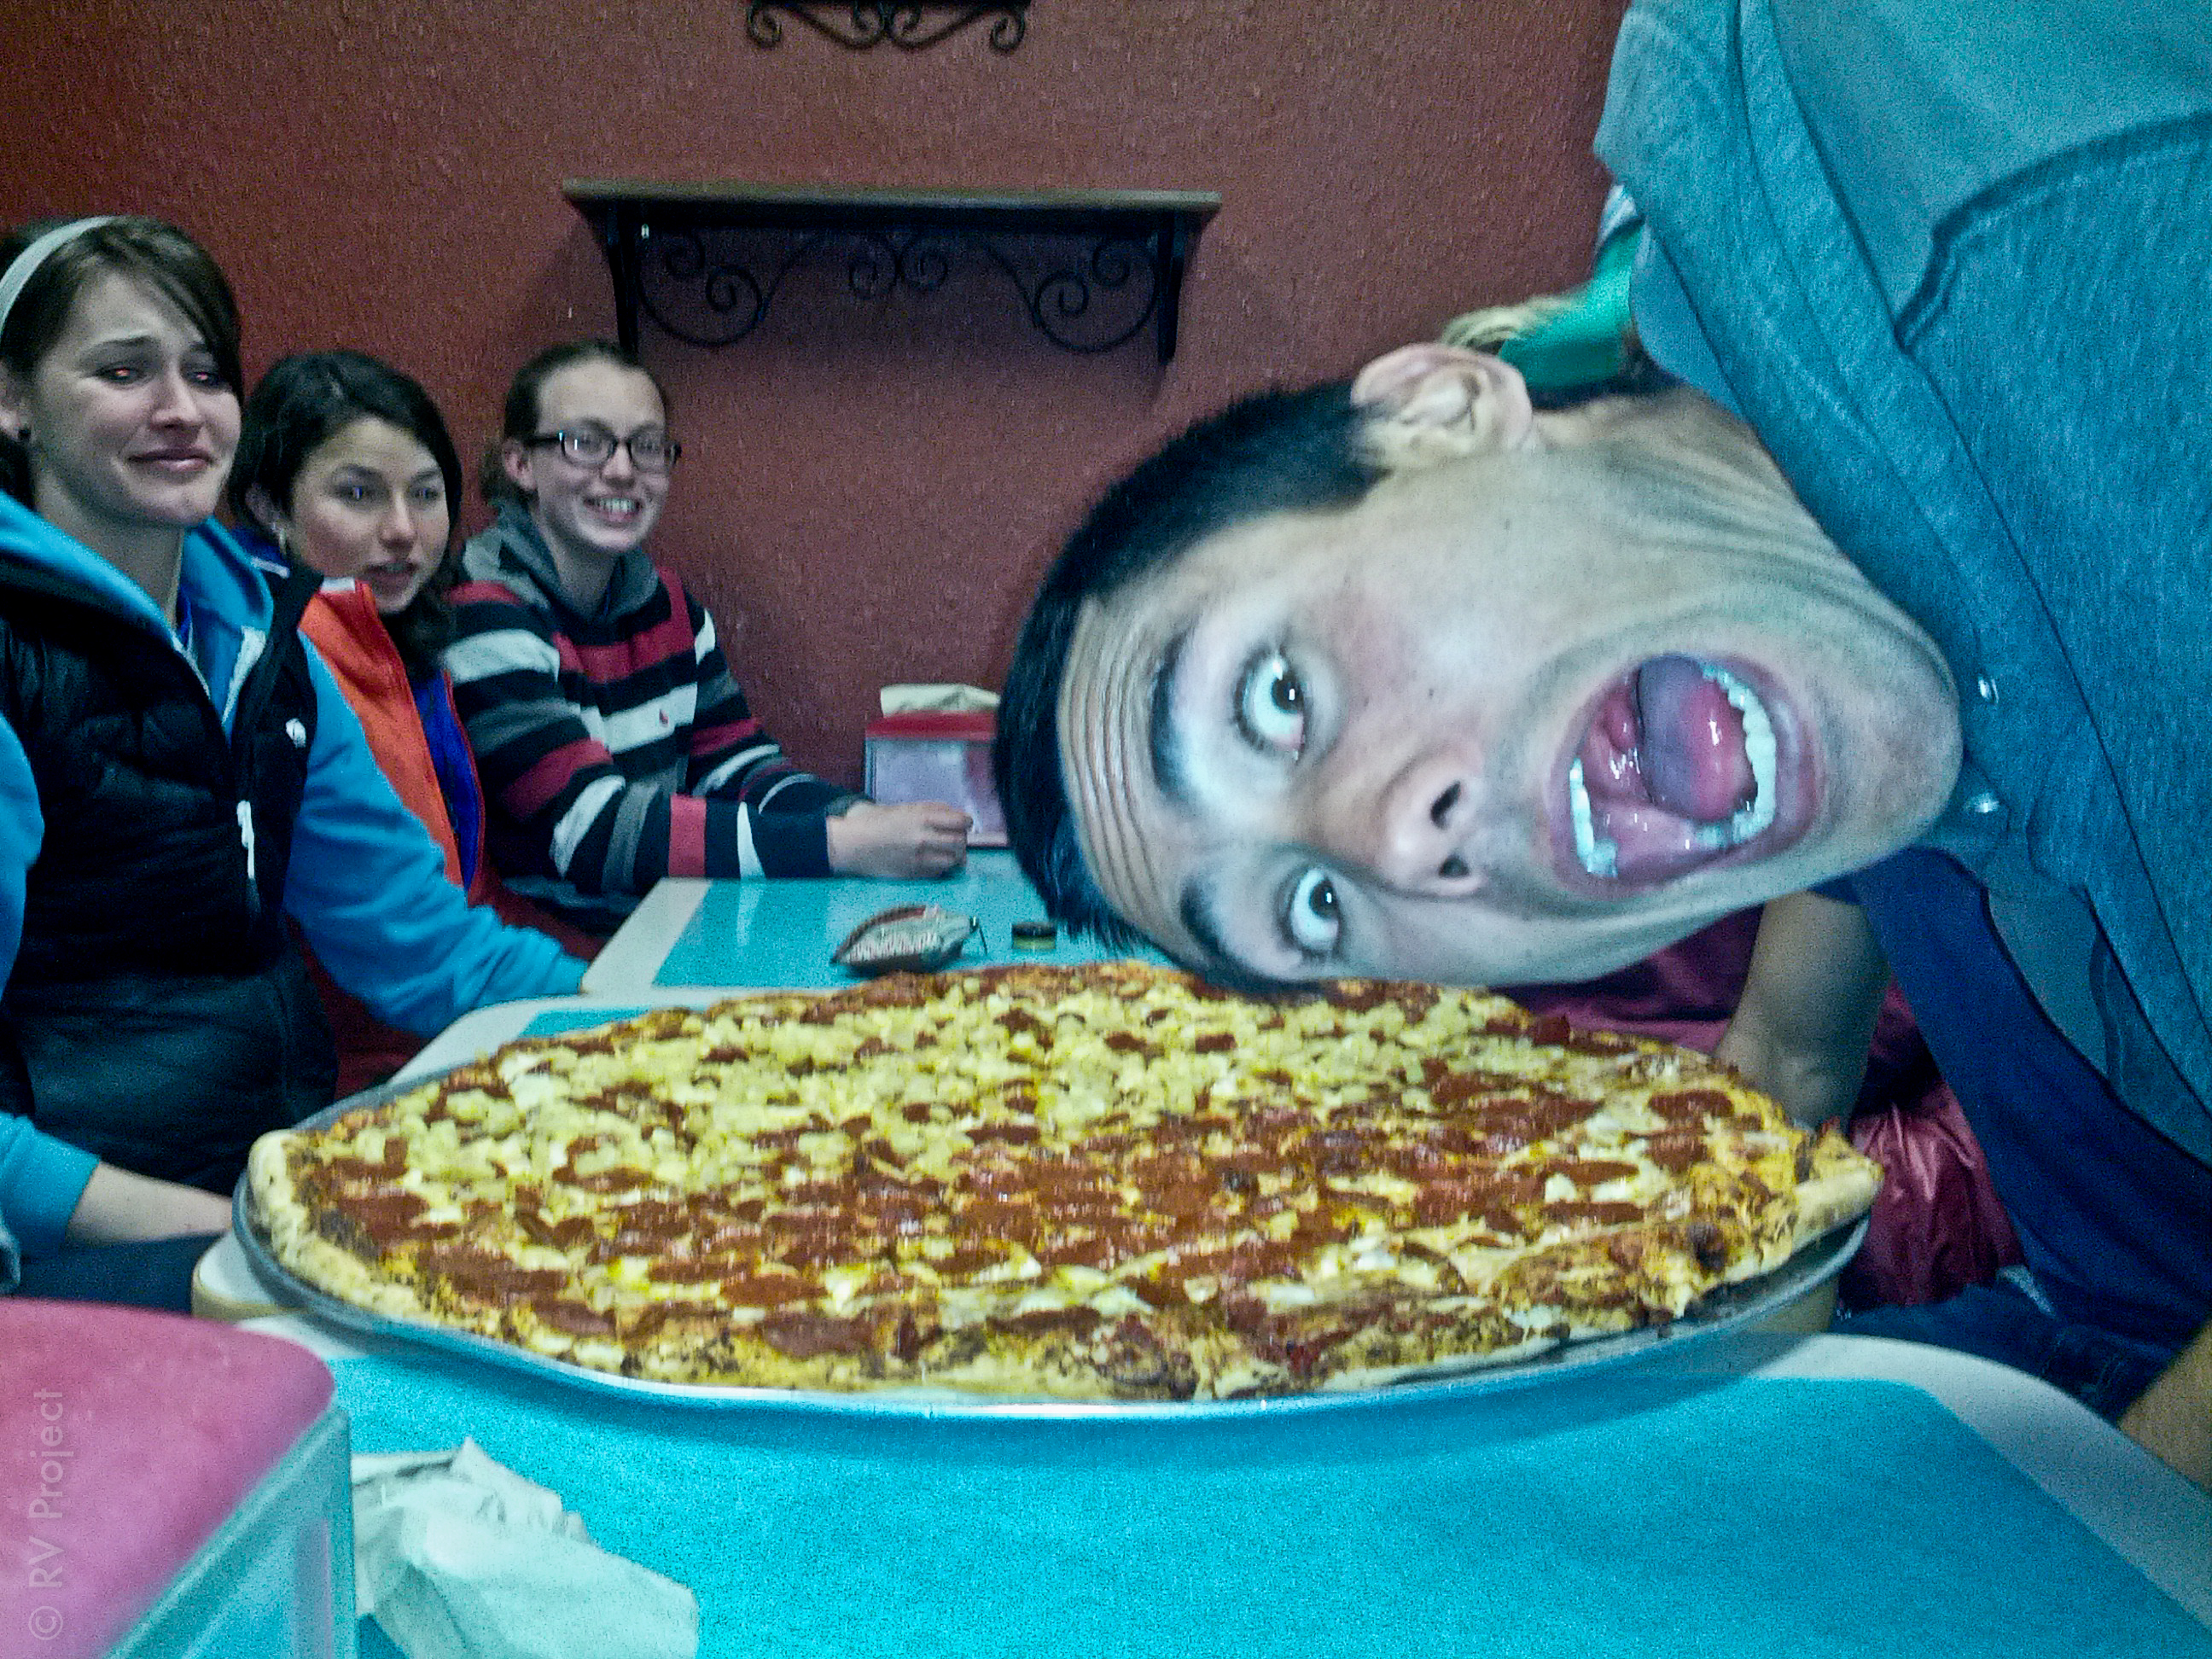 28-inch pizza. 'Nuff said. Oh, and nice photobomb, Spenser.